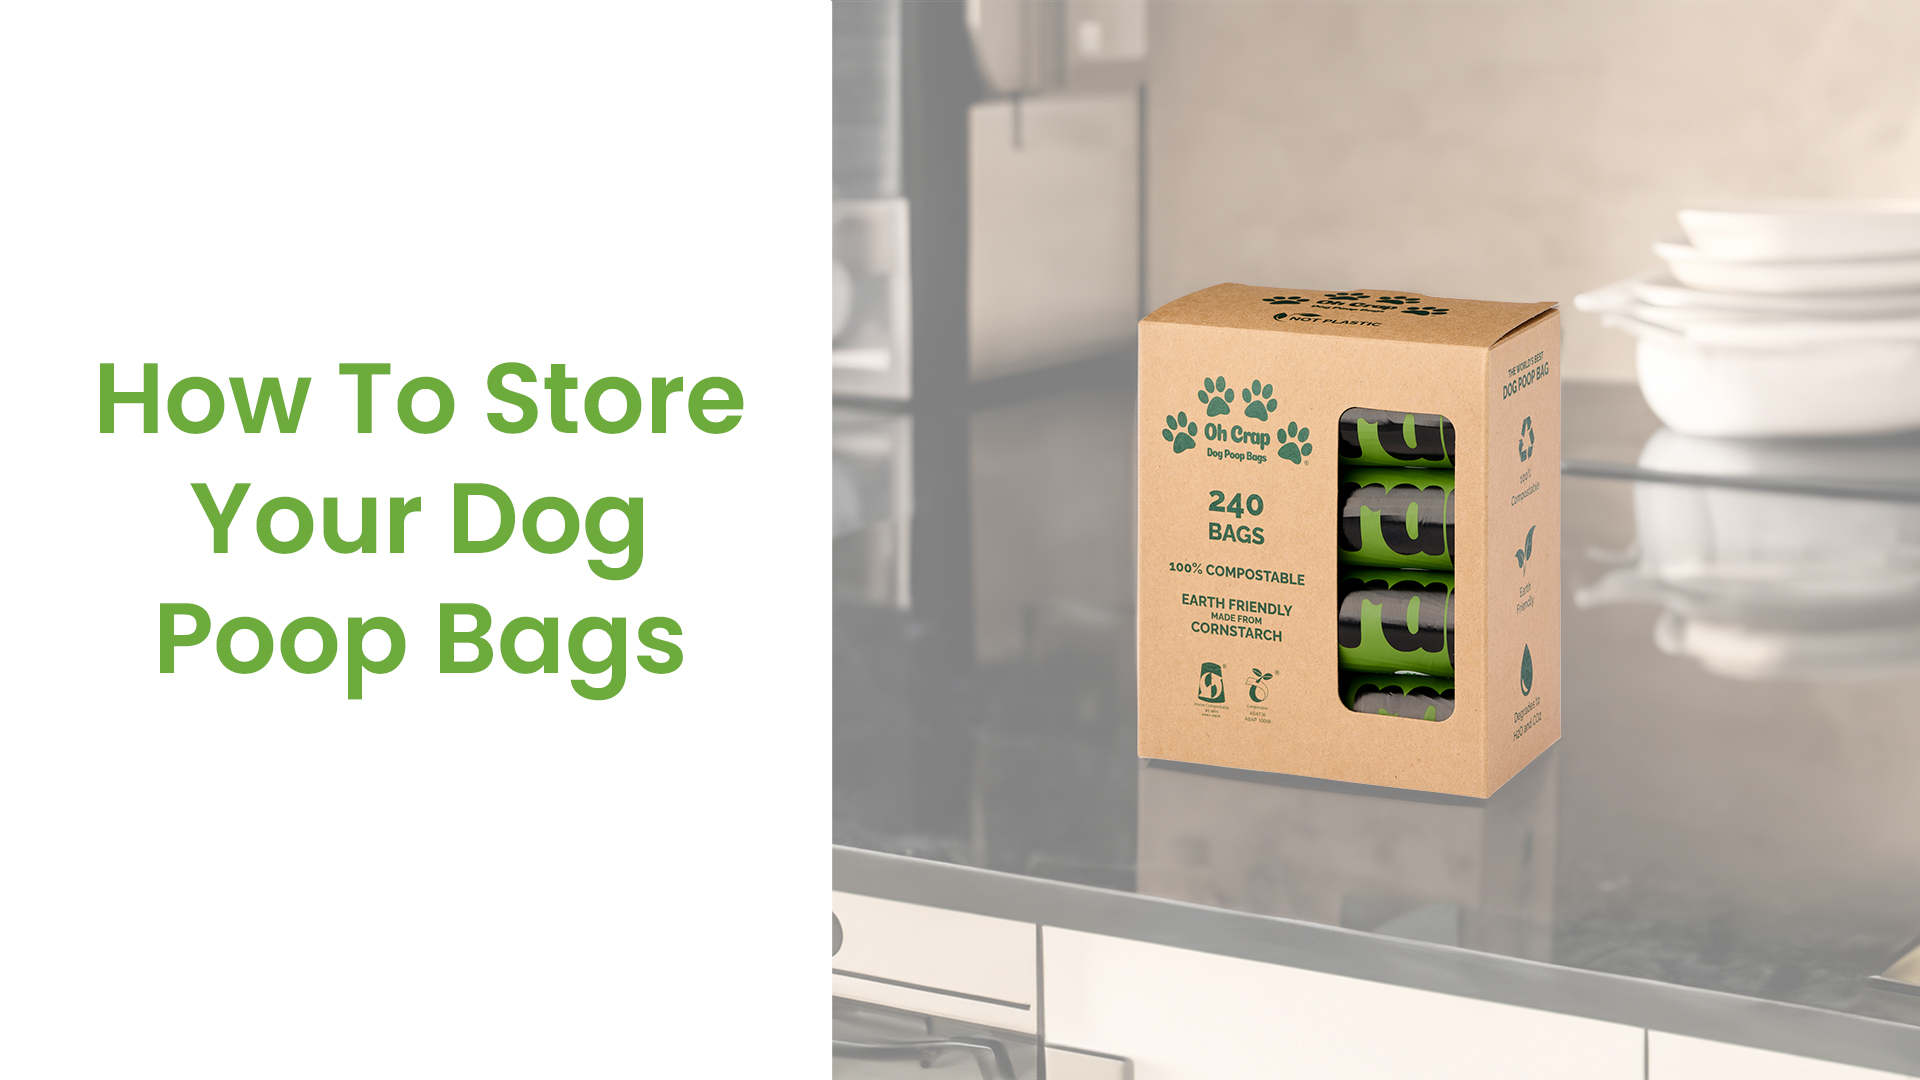 Image of dog poop bags being stored on a kitchen work surface